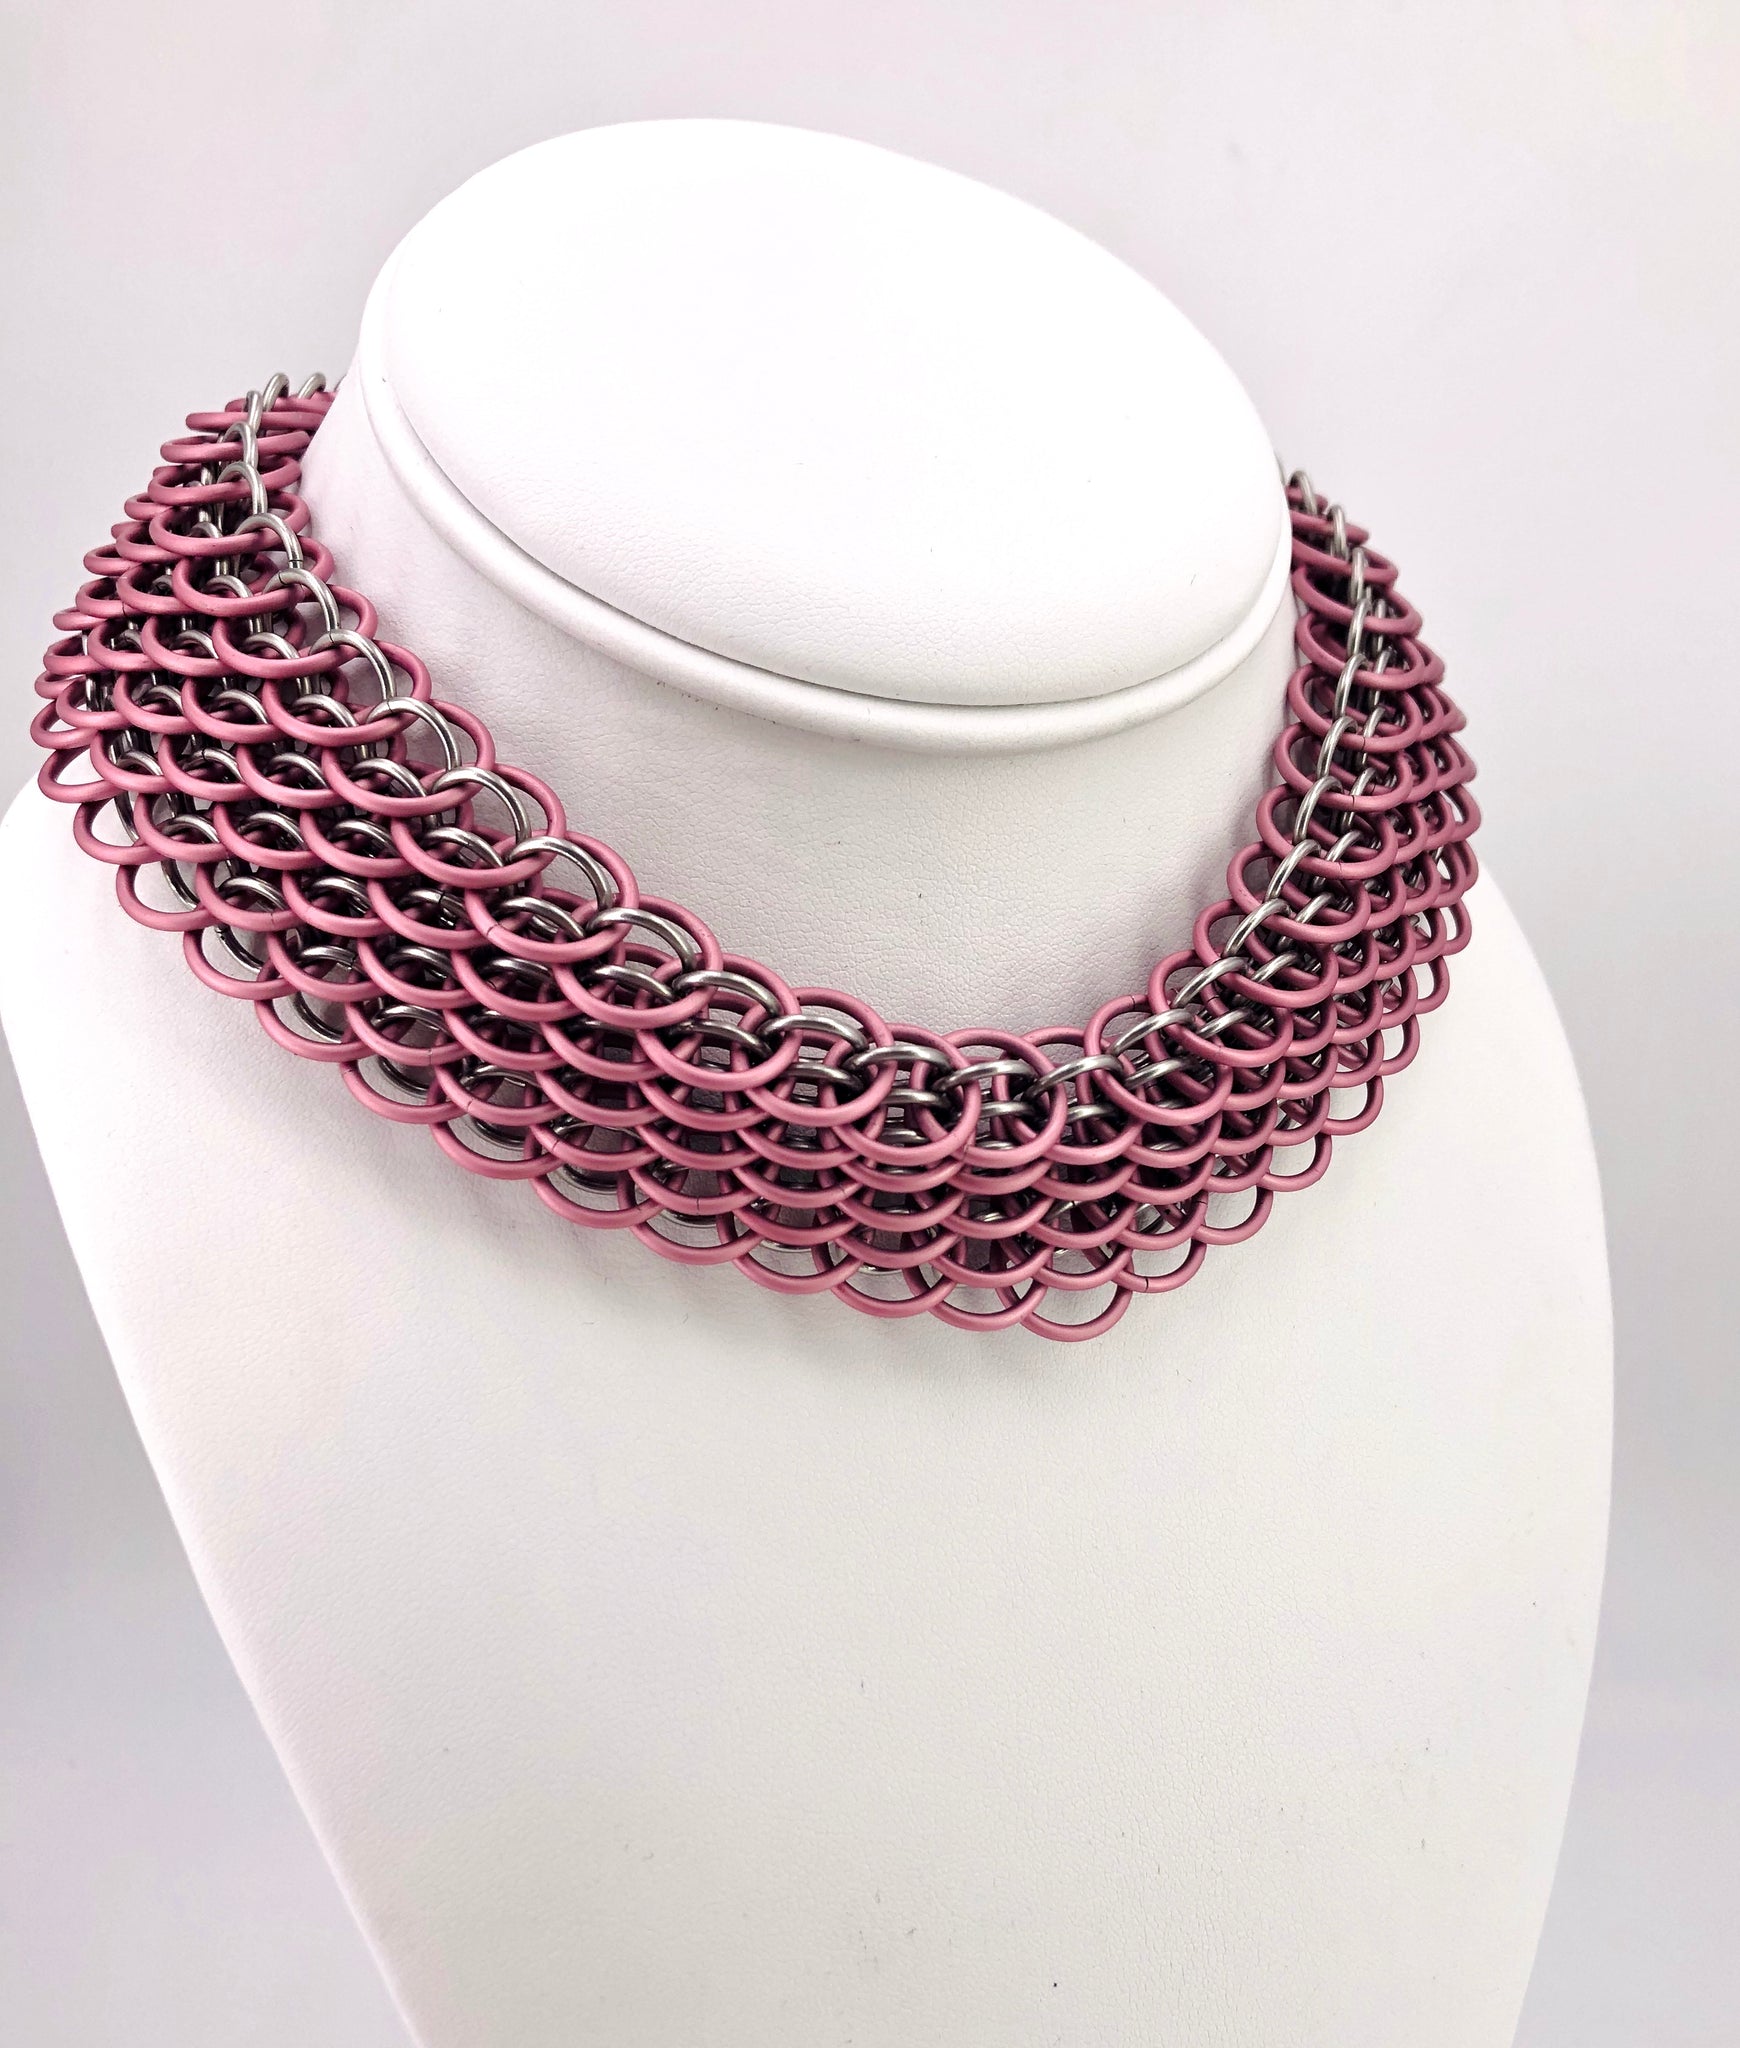 Pink and Steel Elegant Dragonscale Chainmaille Collar Necklace